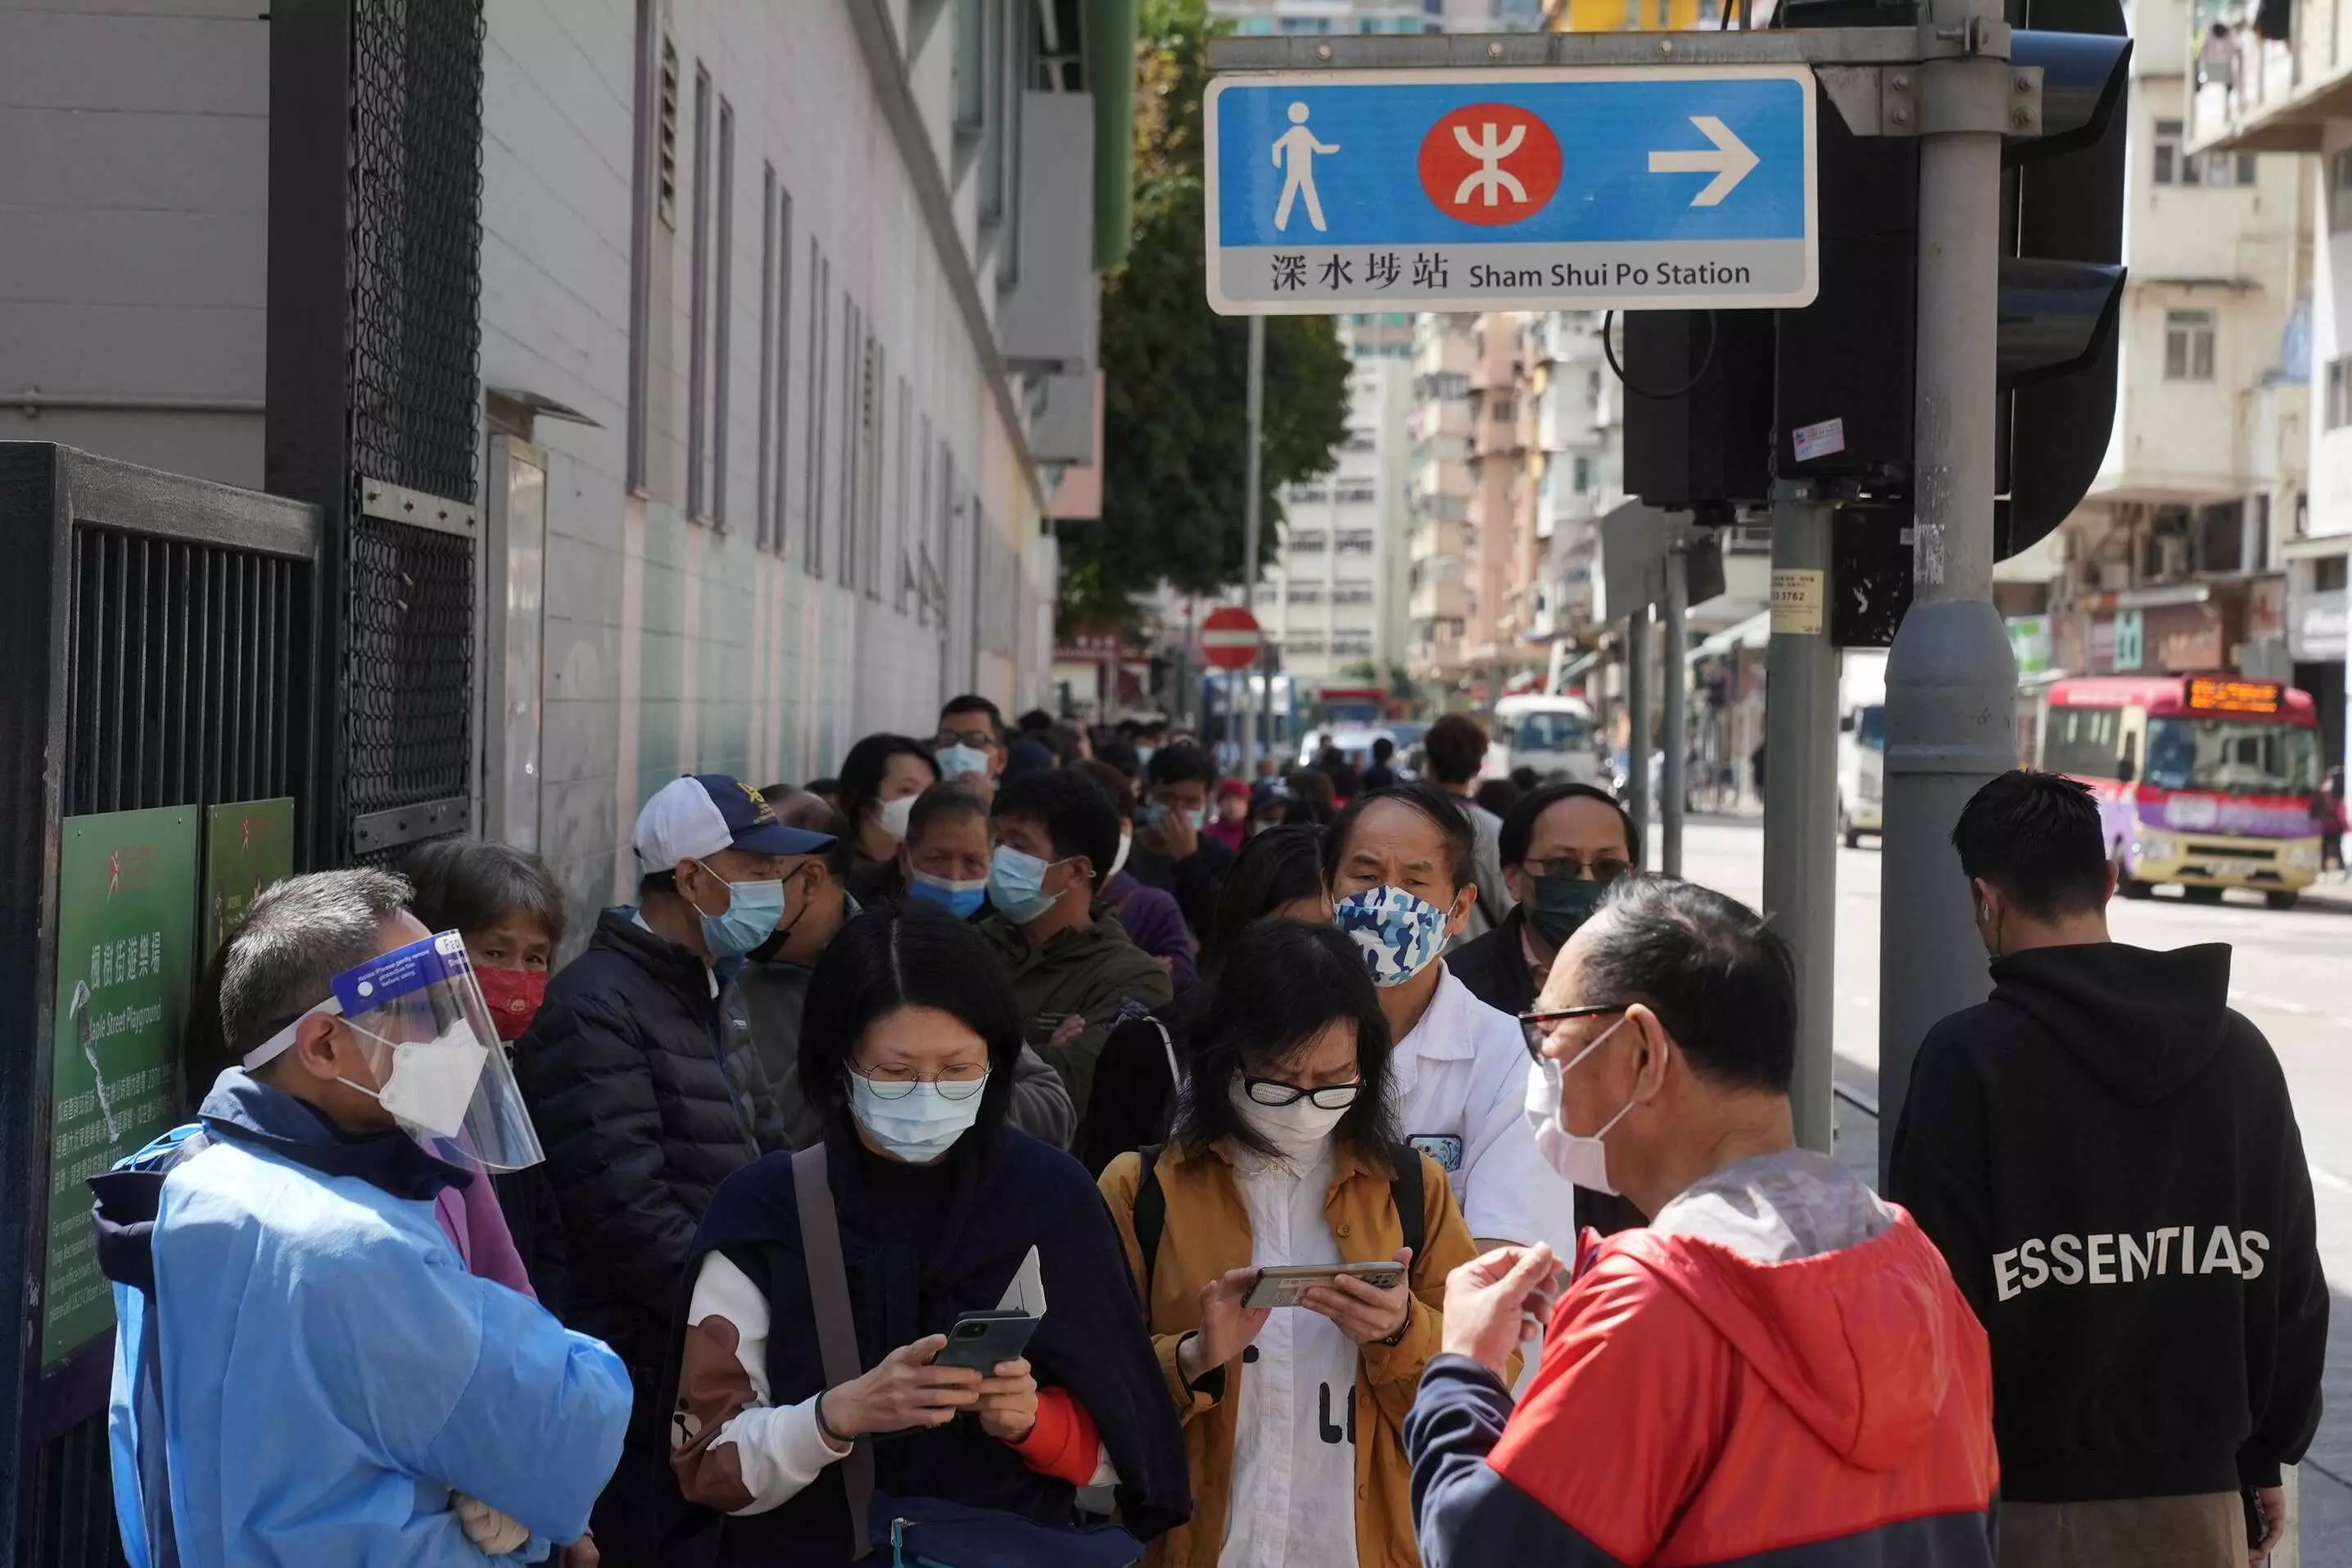 After China, now South Korea faces severe Covid outbreak